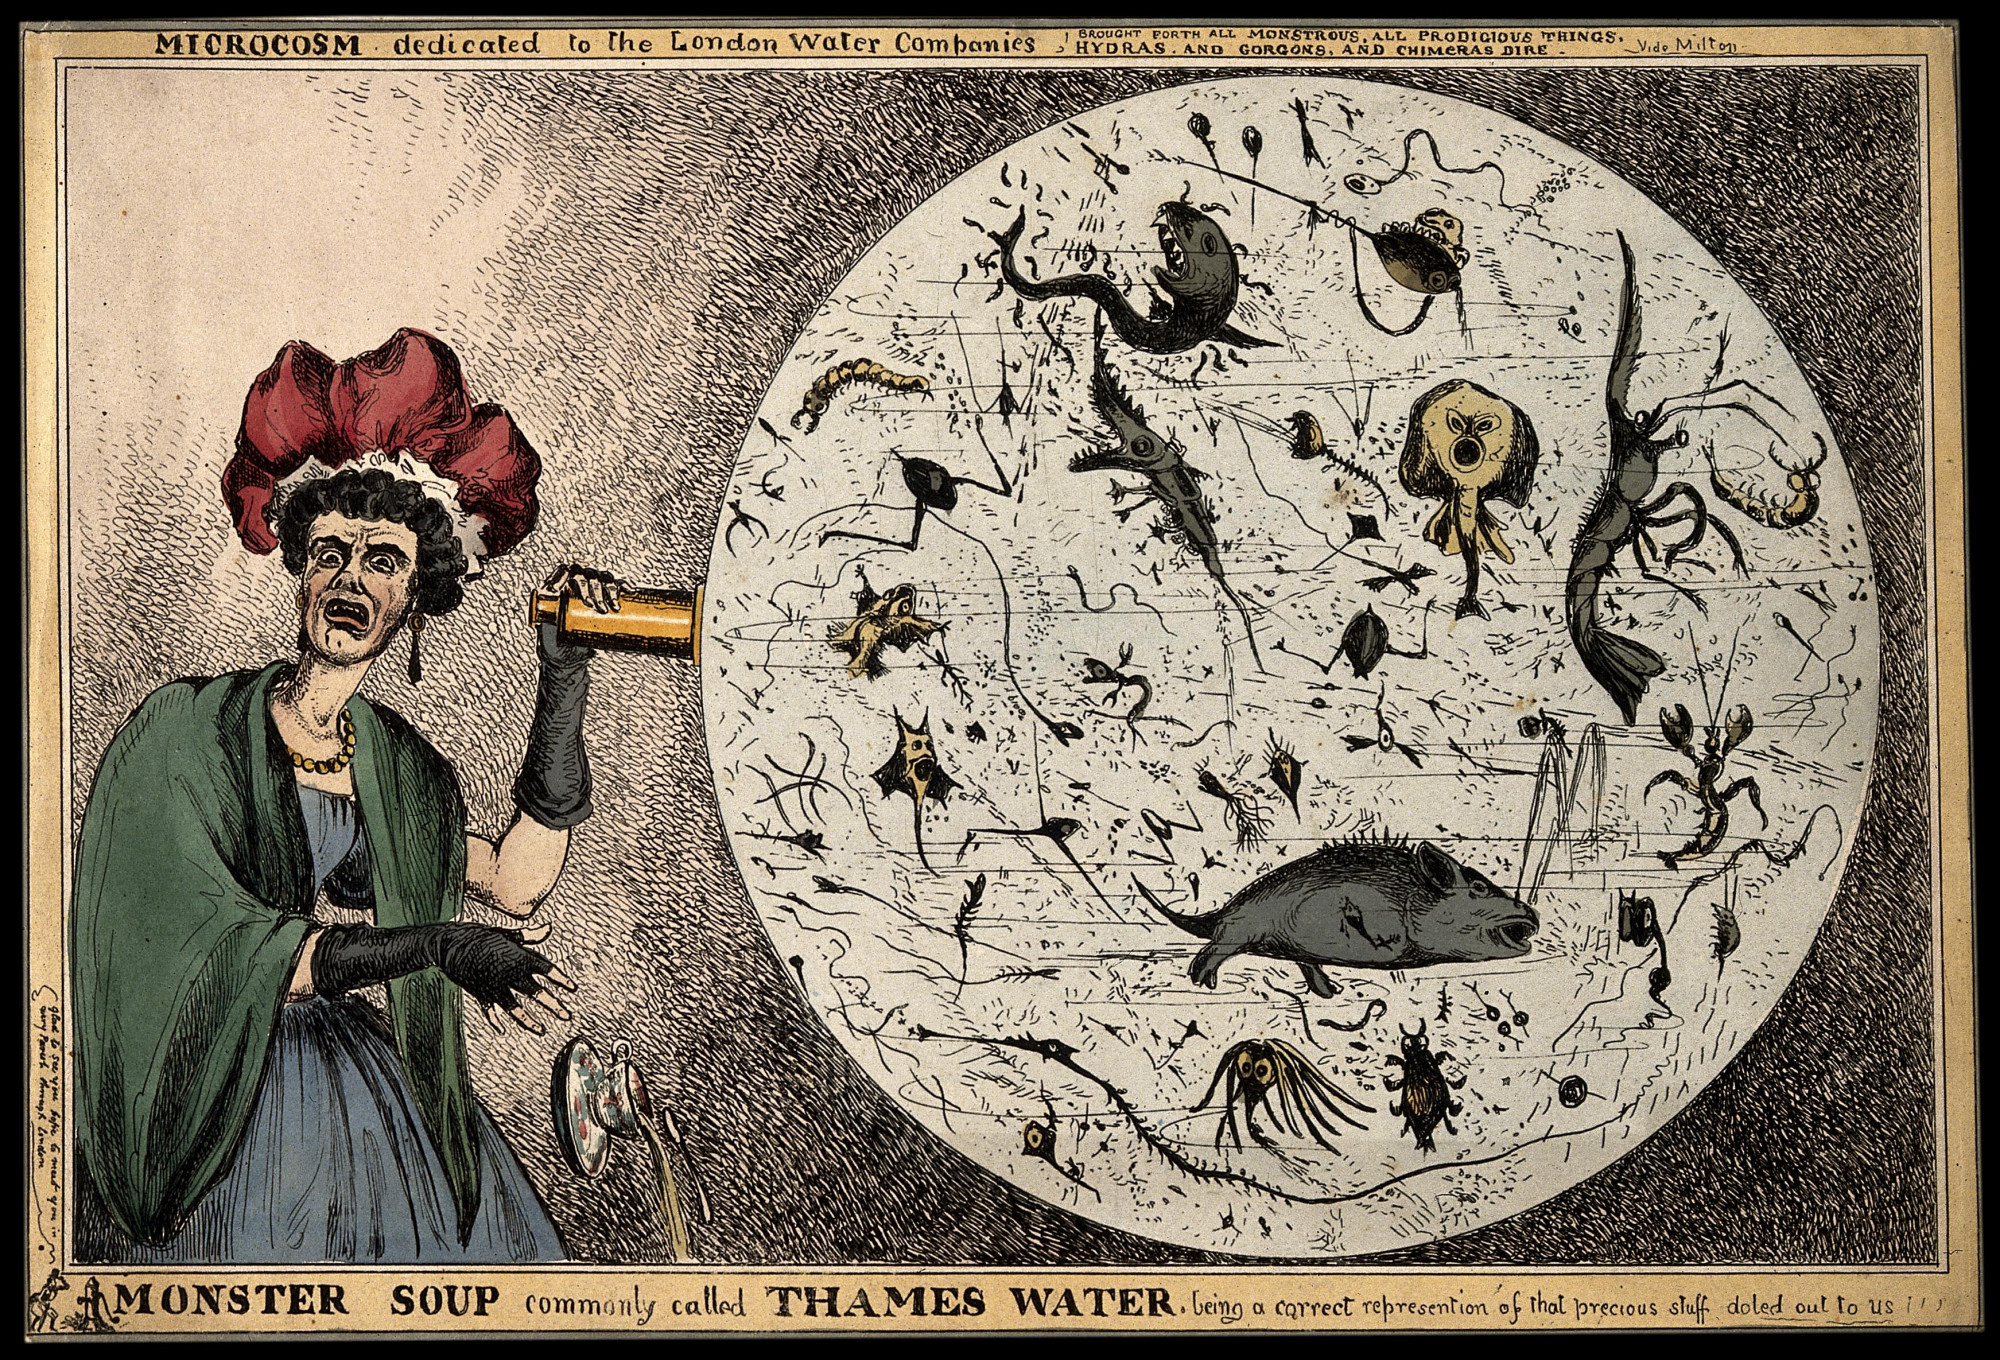 Colored illustration: A woman drops her tea-cup in horror upon discovering the monstrous contents of a magnified drop of Thames water.